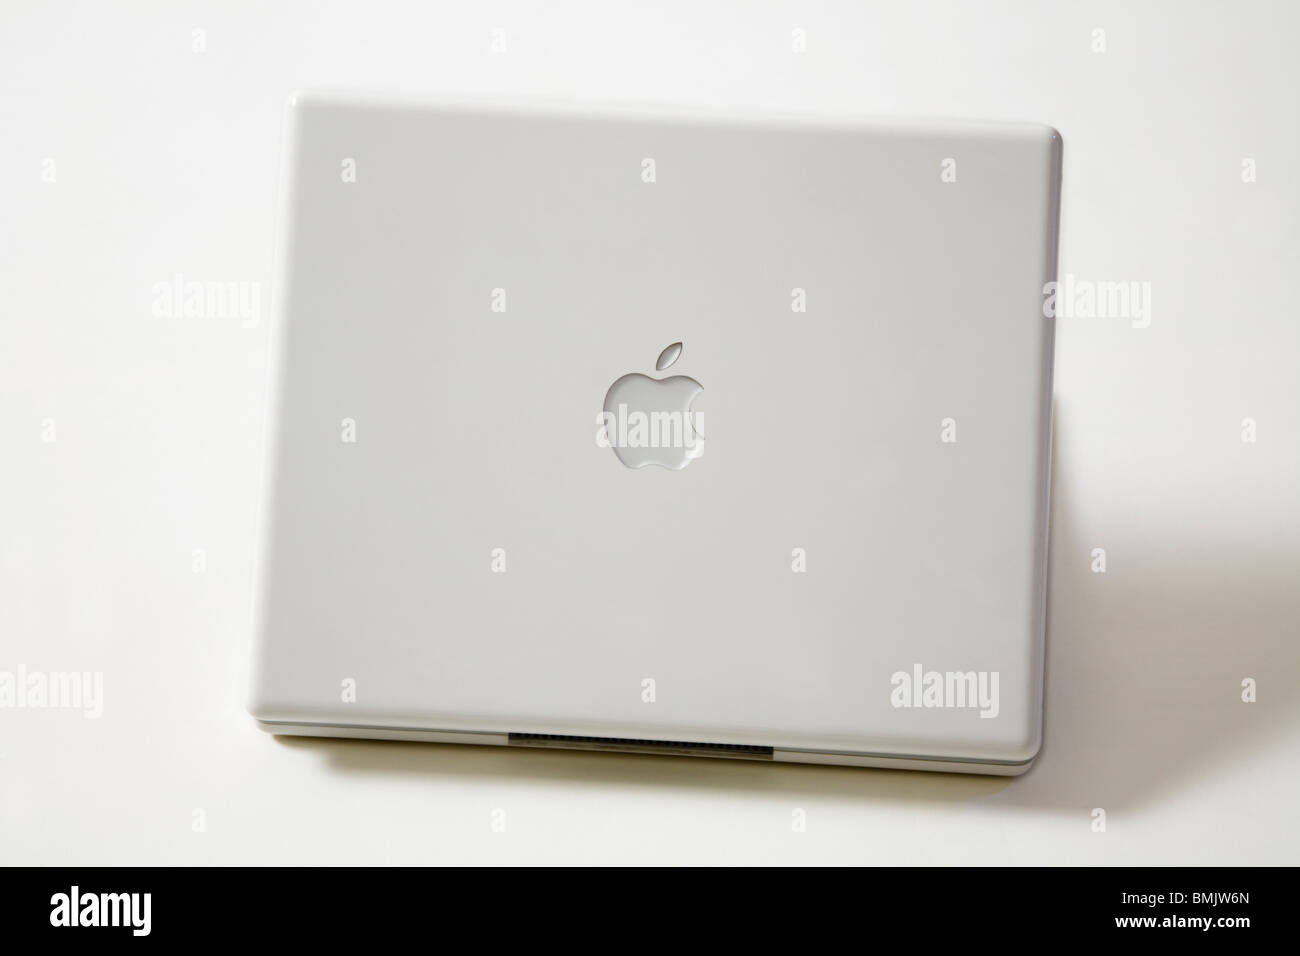 An open Apple iBook G4 laptop / lap top computer showing the Apple logo. Stock Photo